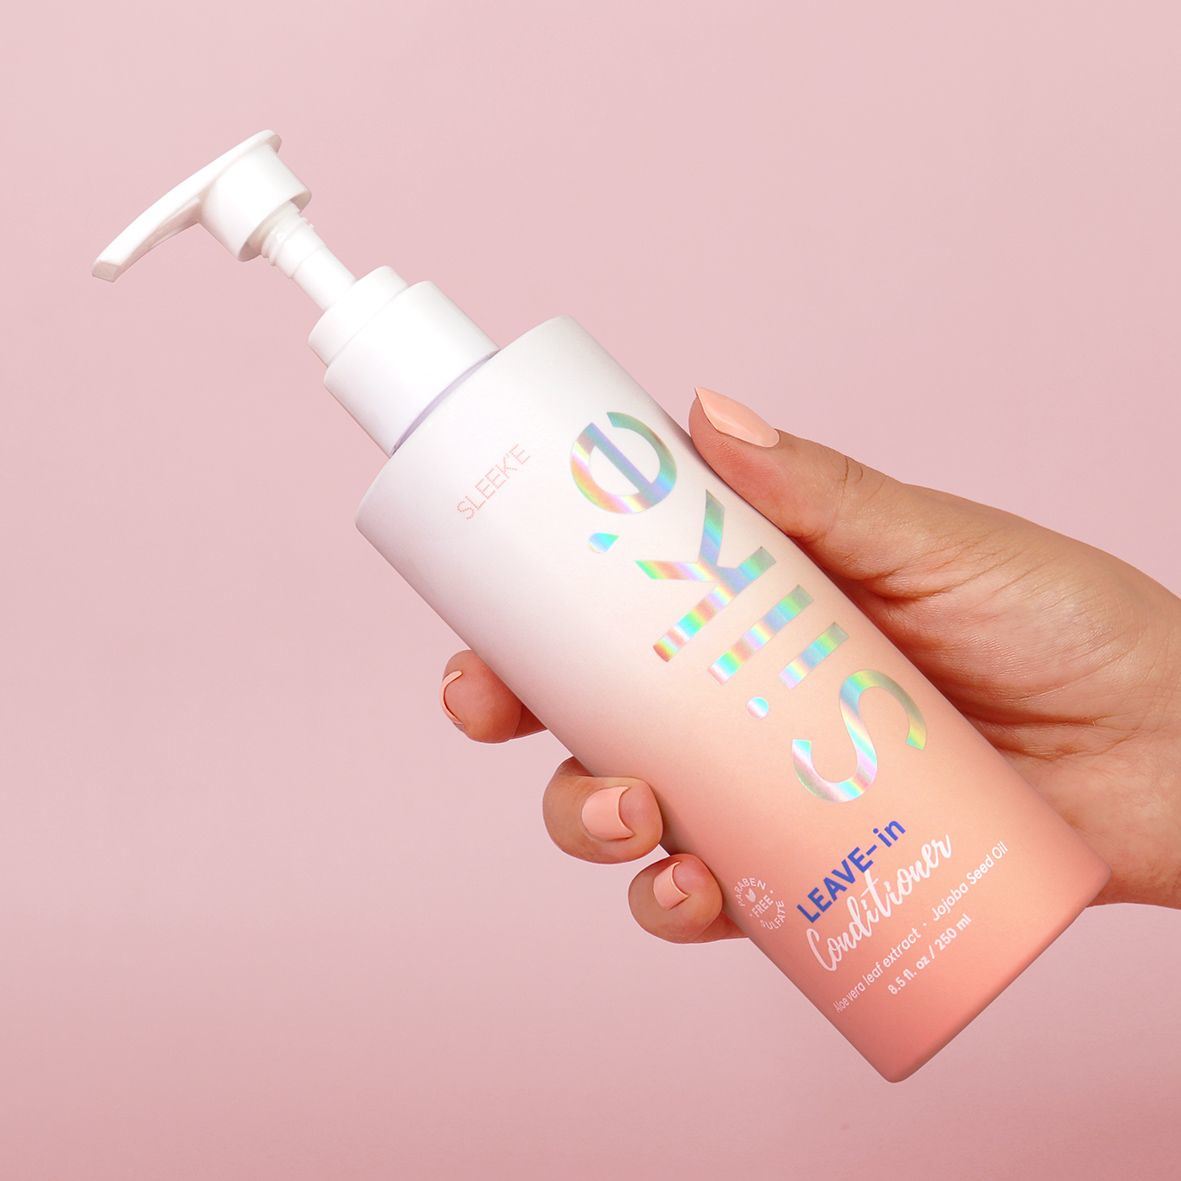 A sleek'd hand holding a bottle of Silk'e leave In Conditioner on a pink background.